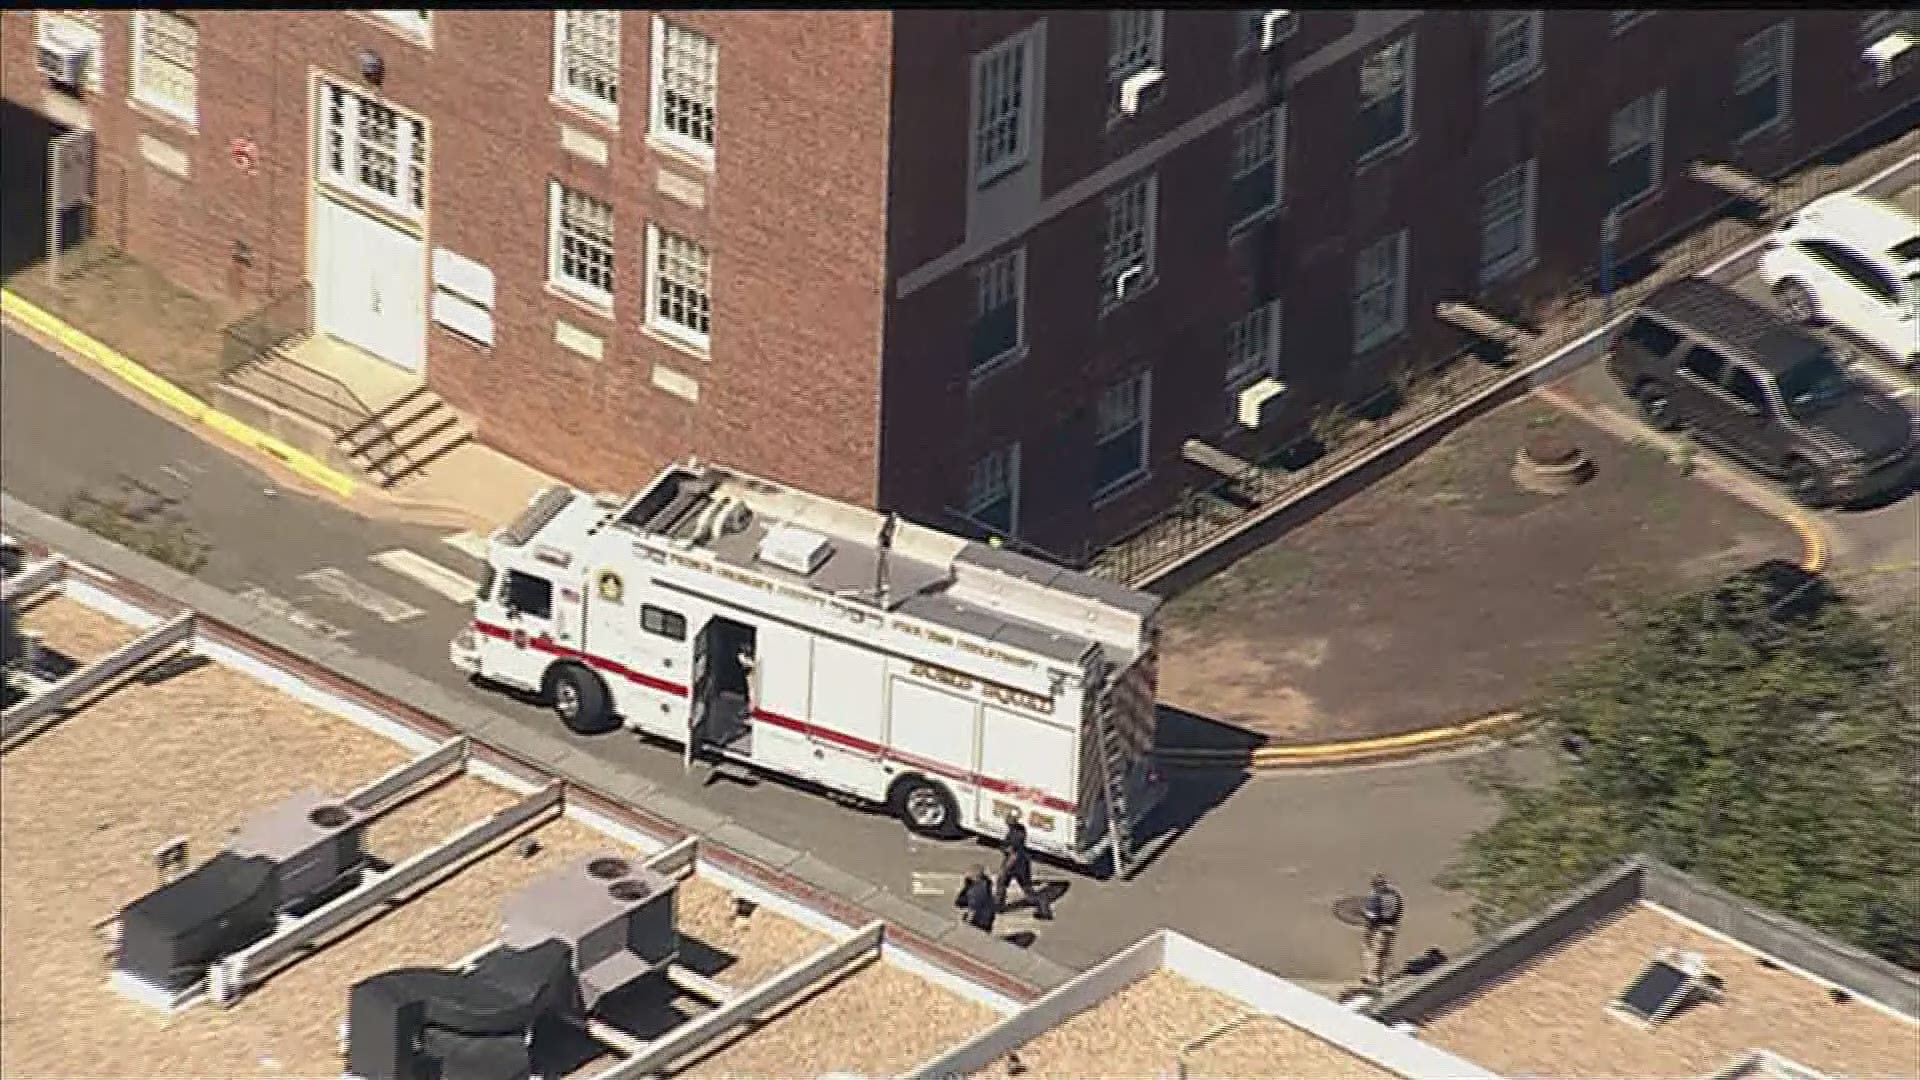 Authorities at University of Maryland College Park were investigating a suspicious package found on campus.